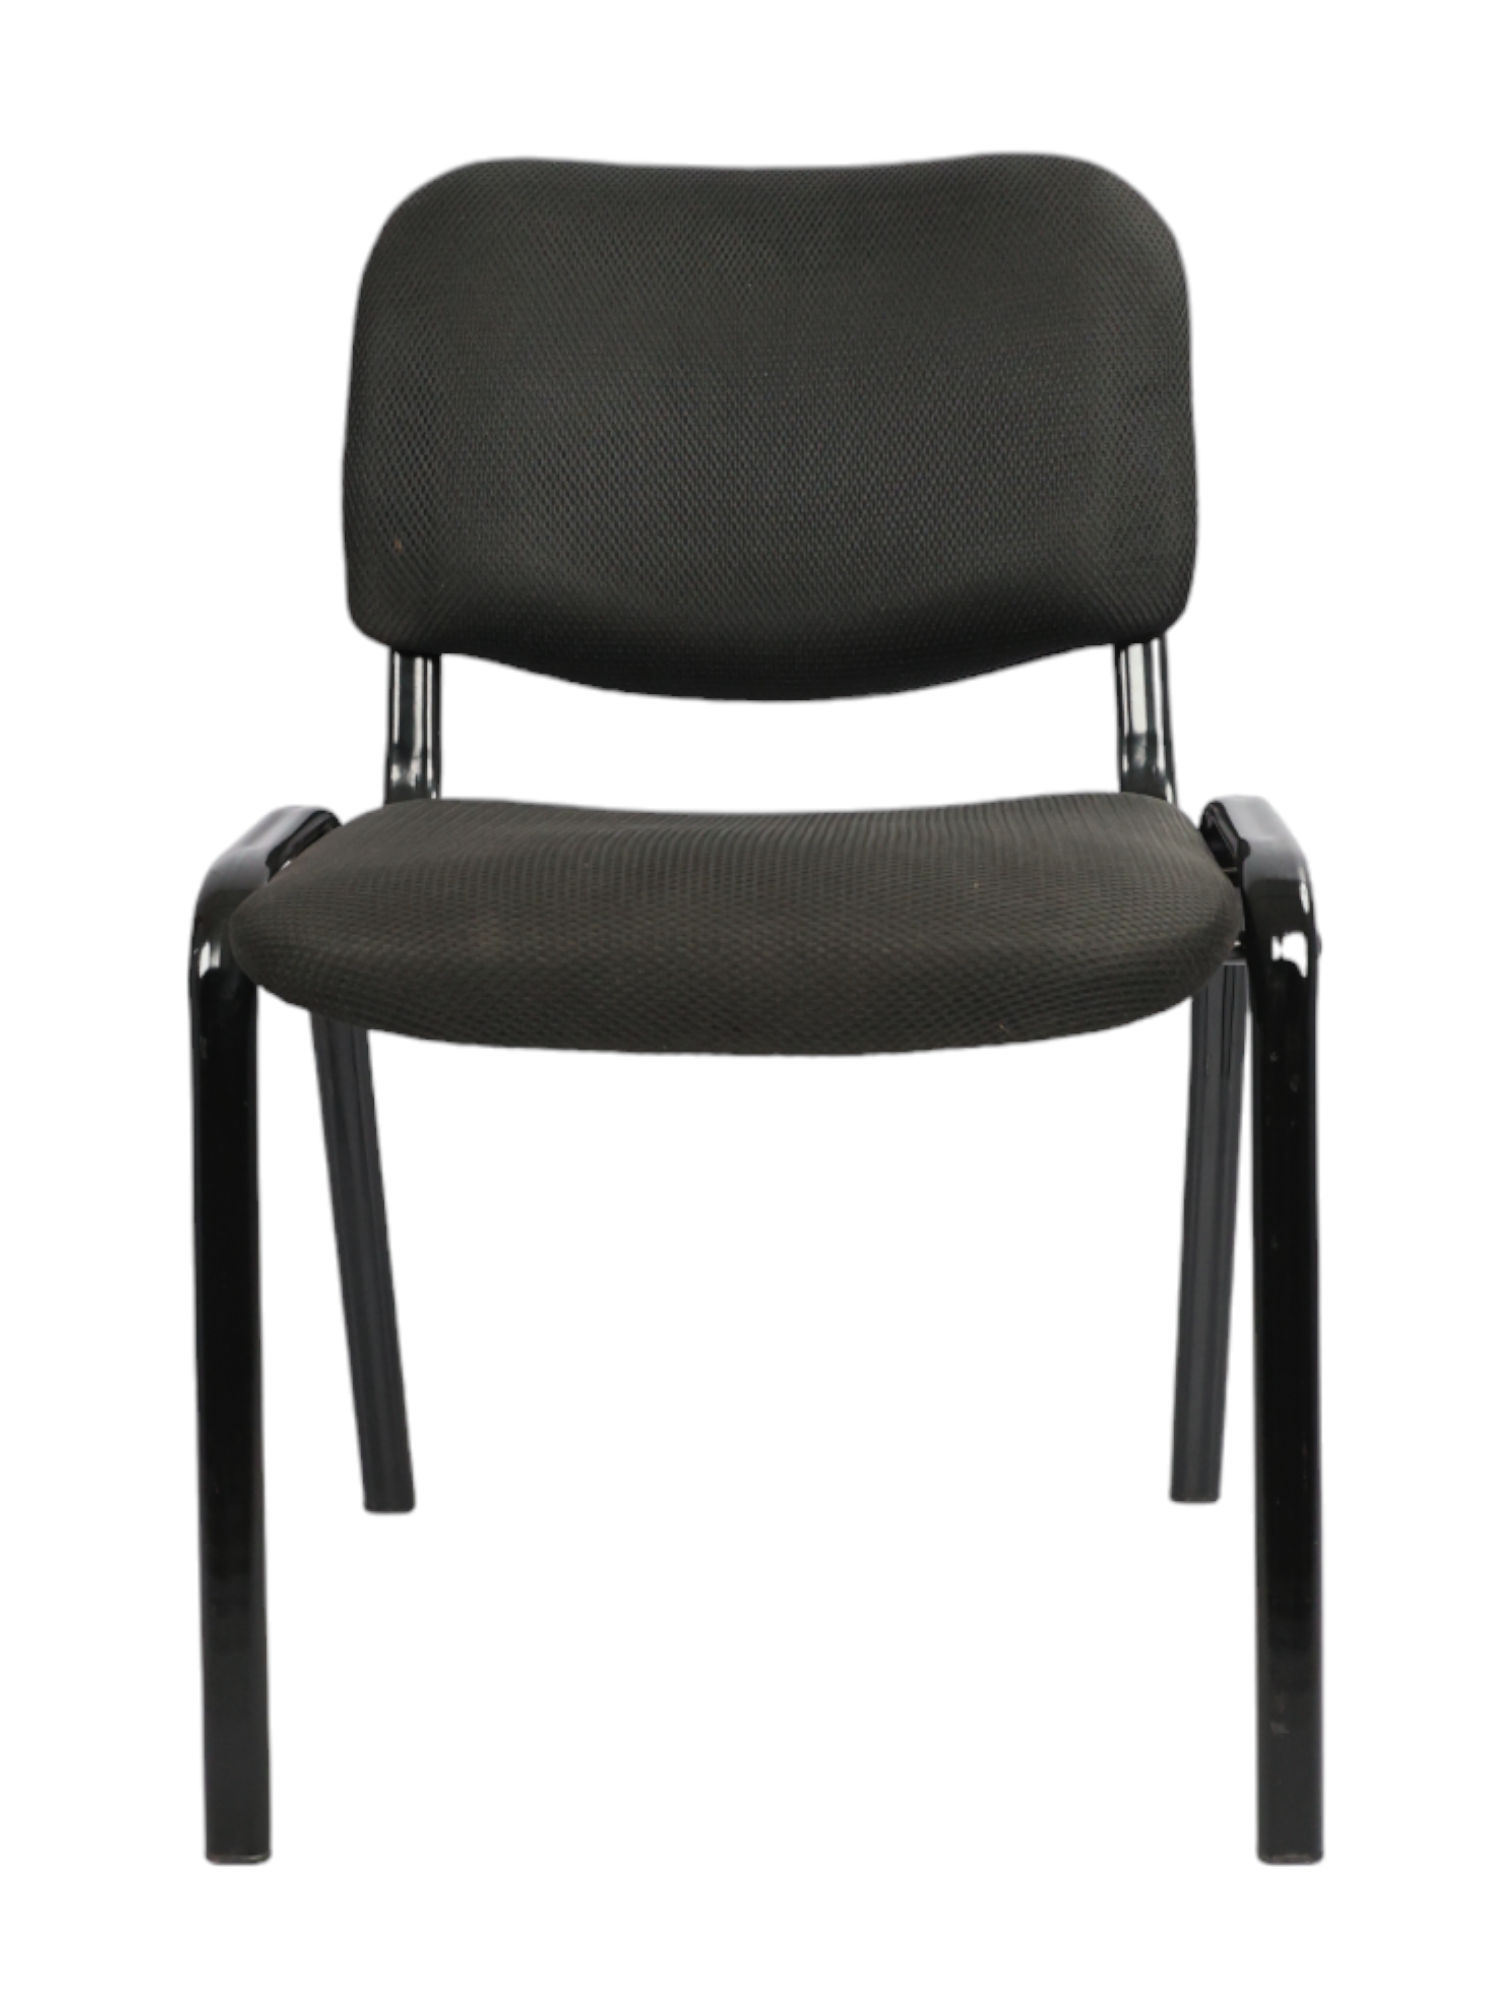 Adhunika Black Dining Chair Without Arm Iron Metal Body And Cushion Seat (21x19x34)